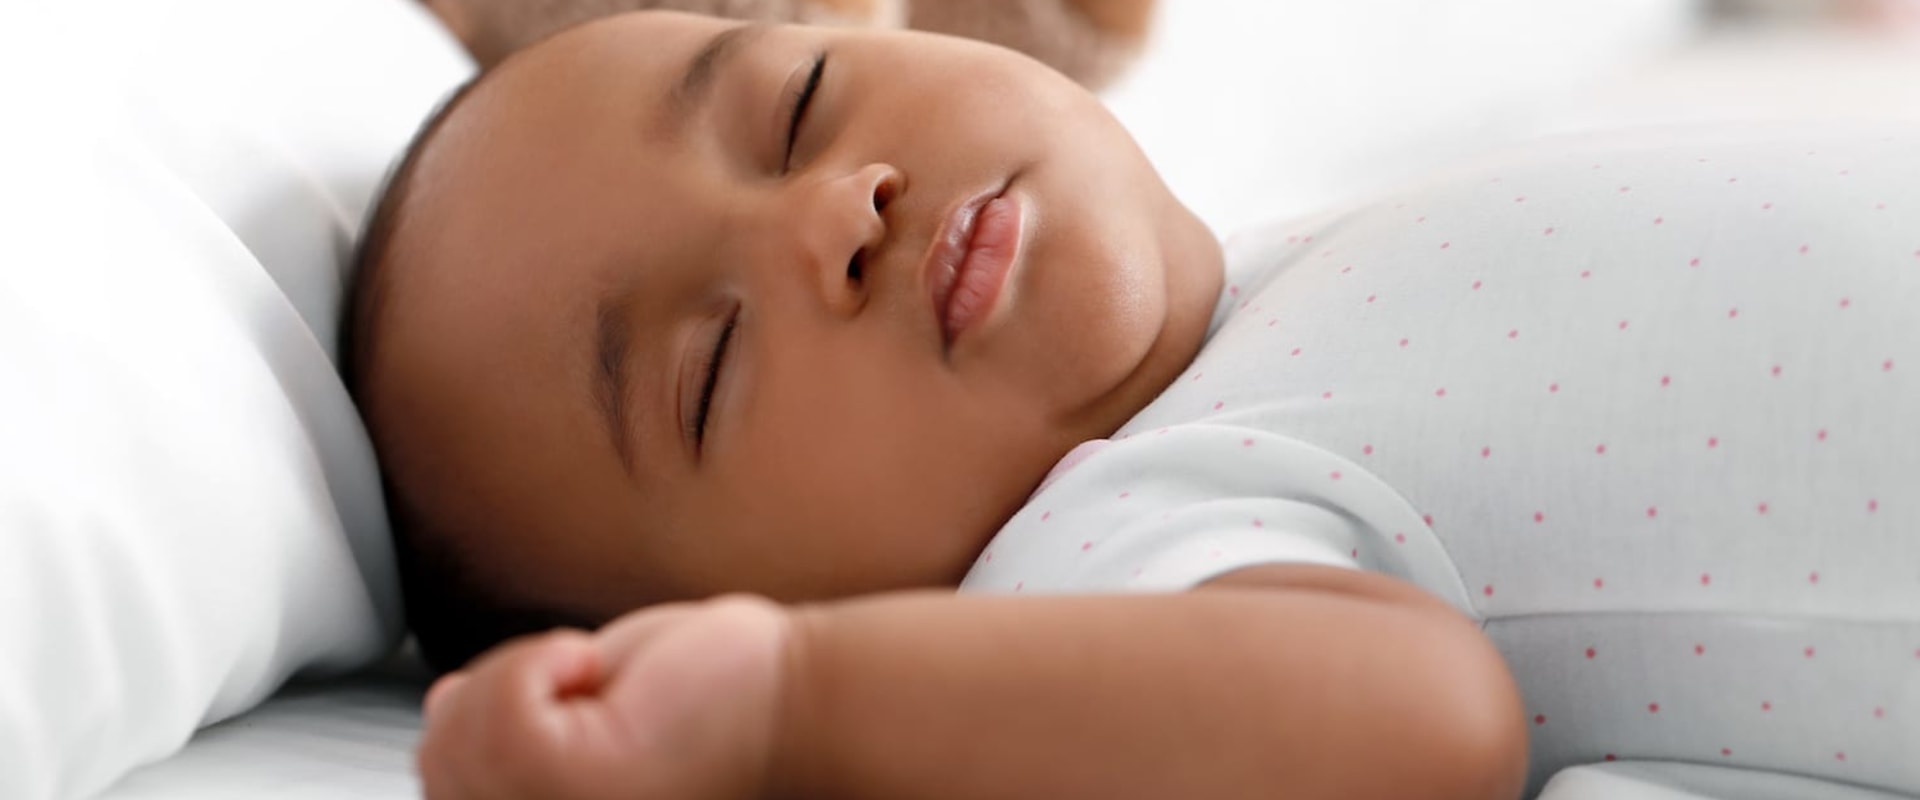 Do all babies have sleep regressions?